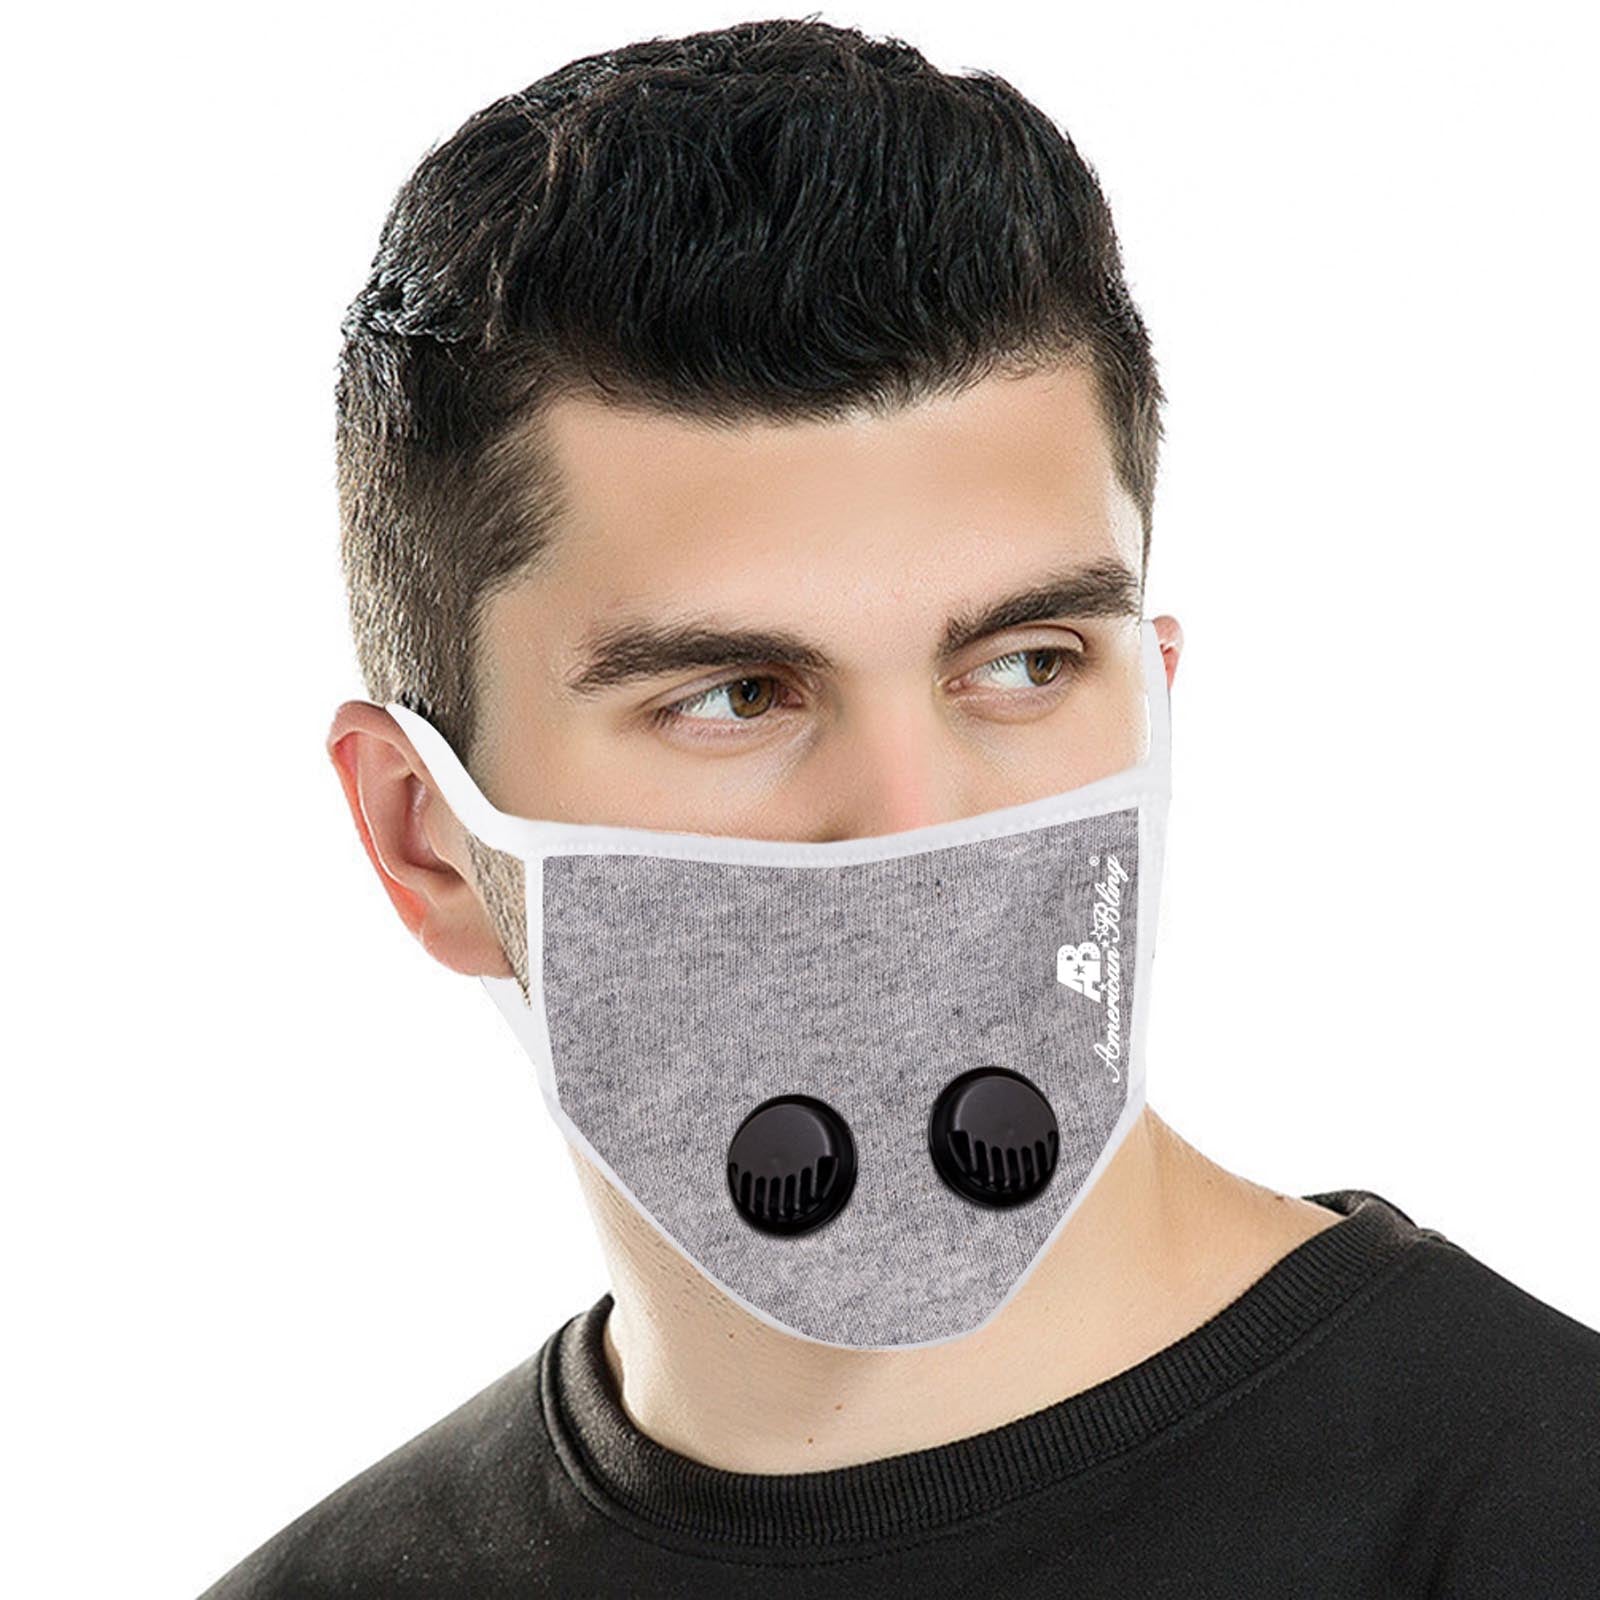 FCM-039DR American Bling Double Breathing Valve Fabric Face Mask Double Layer with Adjustable Nose Clip 1PC Pack